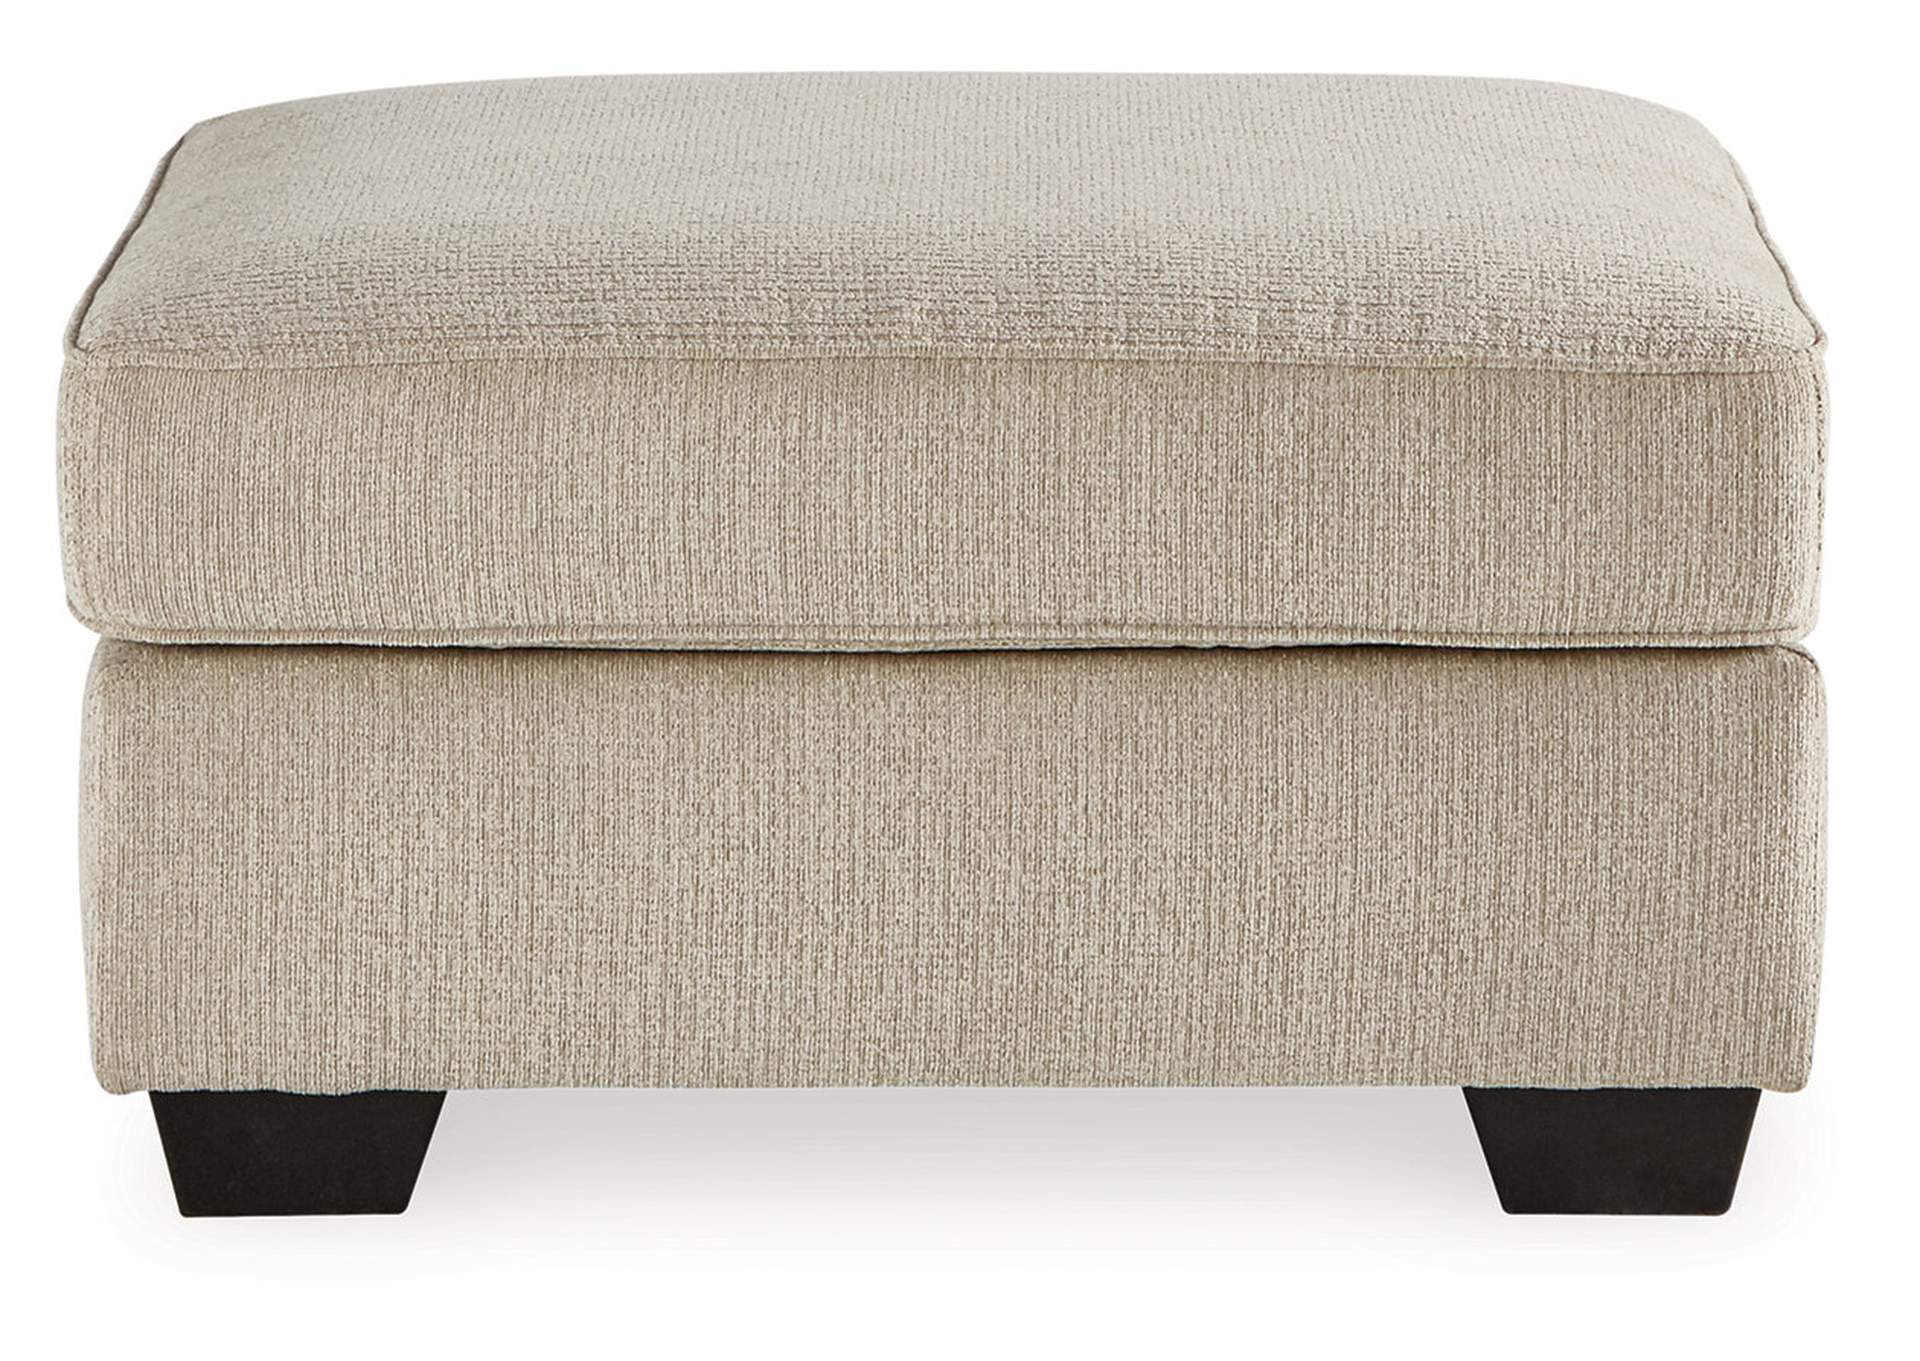 Decelle Oversized Accent Ottoman,Signature Design By Ashley